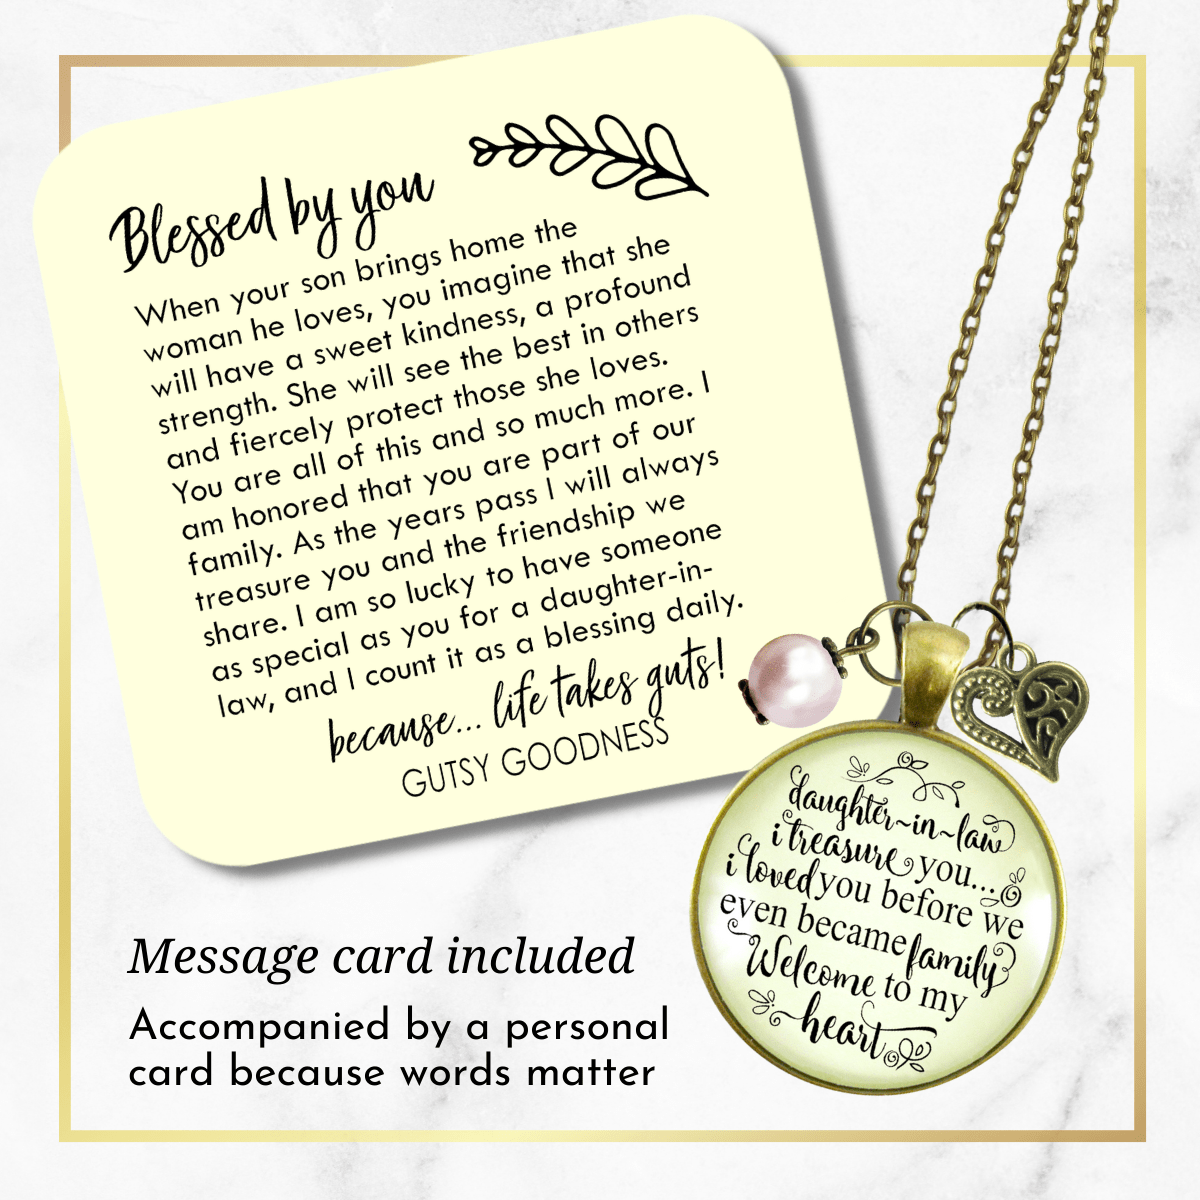 Gutsy Goodness Daughter in Law Necklace Treasure You Family Welcome Meaningful Jewelry - Gutsy Goodness;Daughter In Law Necklace Treasure You Family Welcome Meaningful Jewelry - Gutsy Goodness Handmade Jewelry Gifts